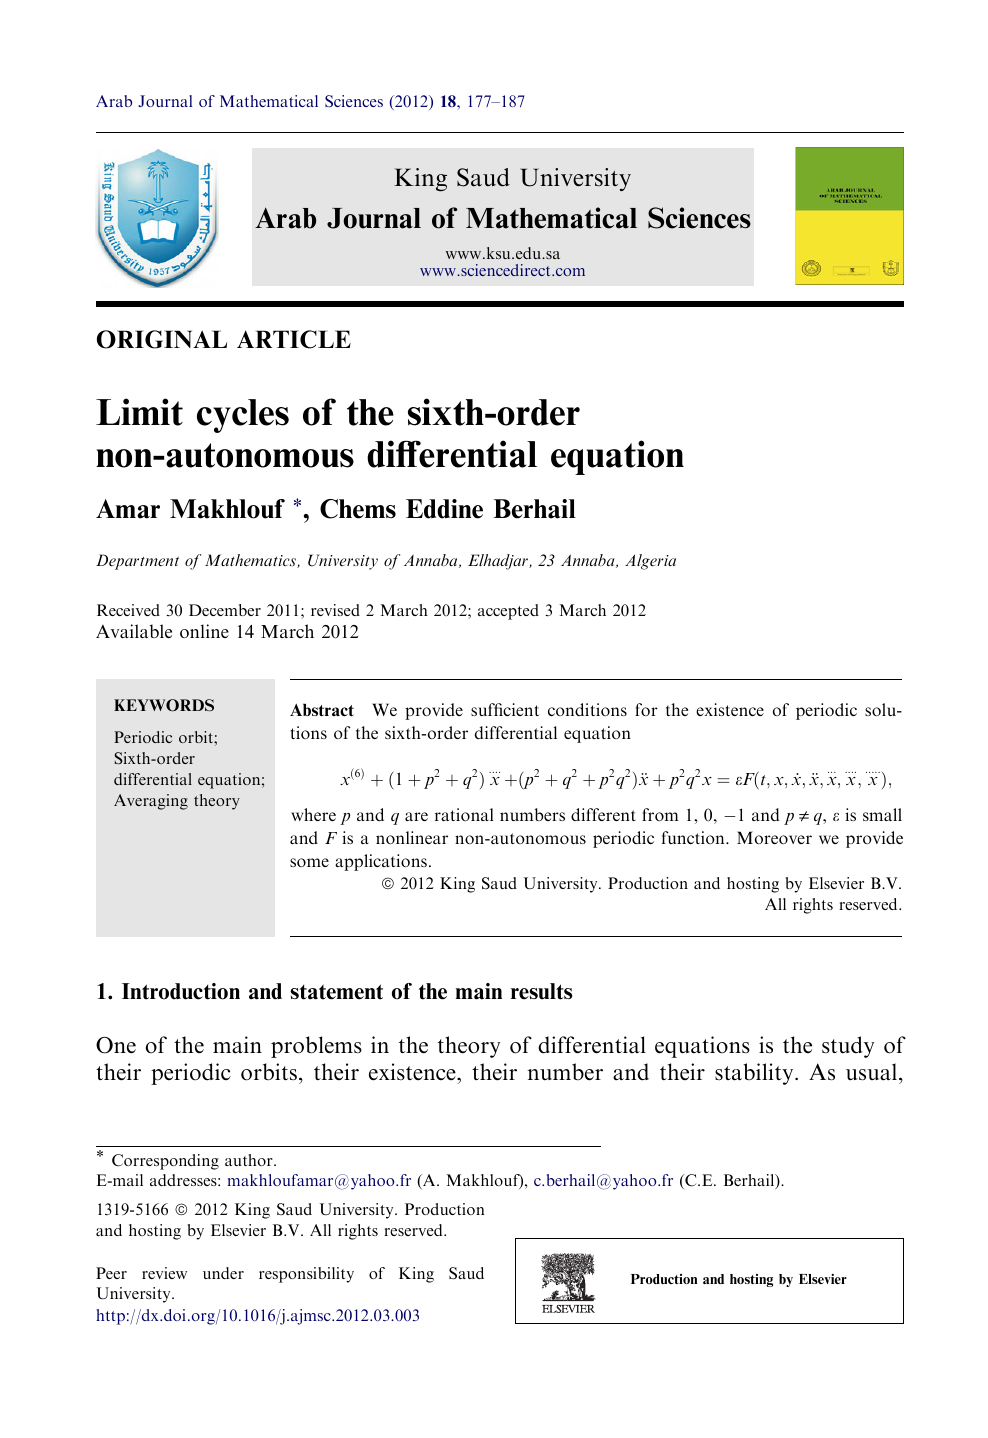 Limit Cycles Of The Sixth Order Non Autonomous Differential Equation Topic Of Research Paper In Mathematics Download Scholarly Article Pdf And Read For Free On Cyberleninka Open Science Hub